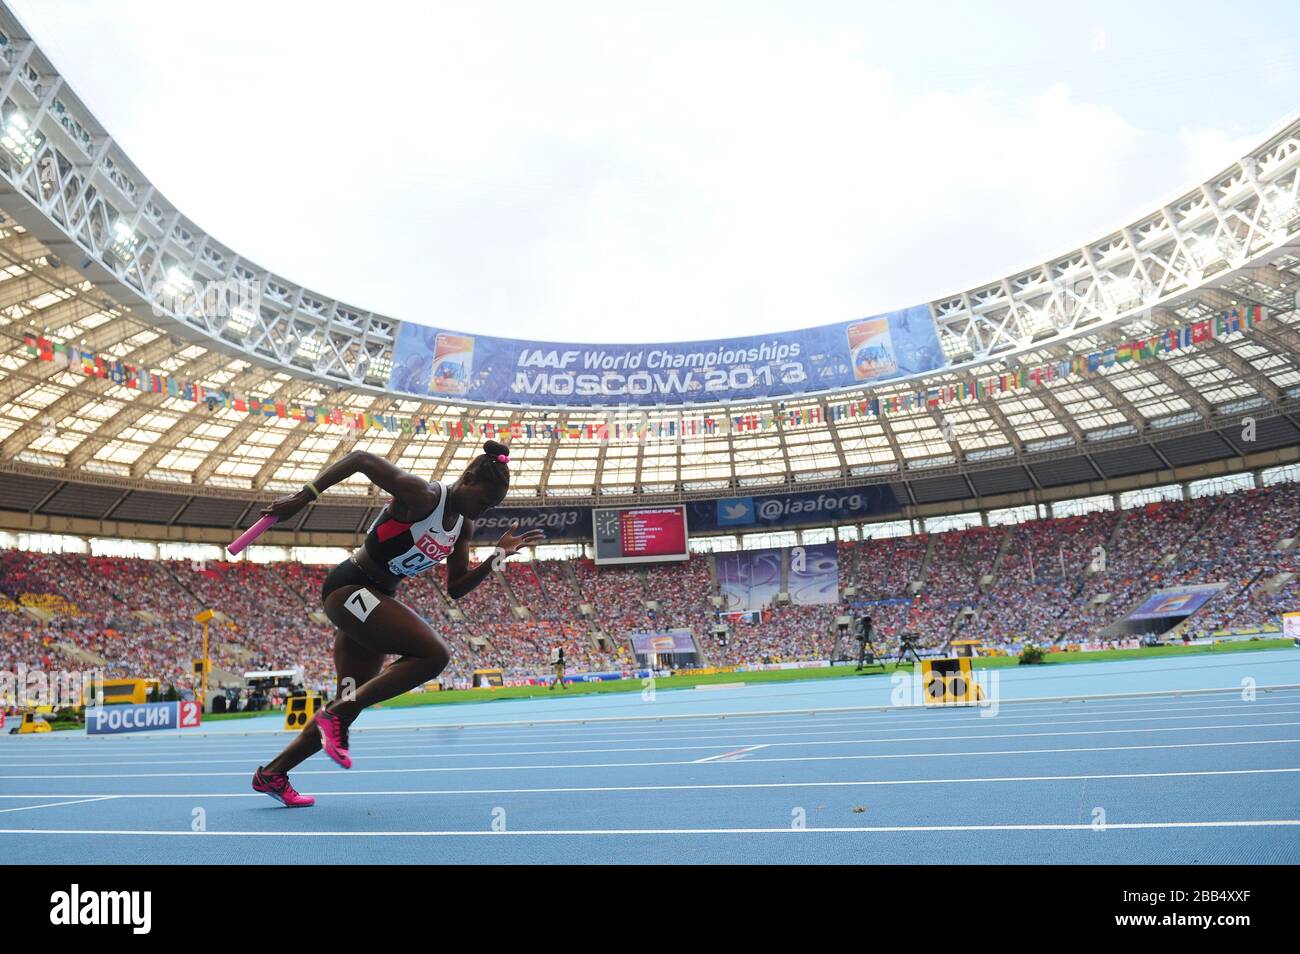 Canada's Crystal Emmanuel sets off in the first leg of the Women's 4x100m Relay Final during day nine of the 2013 IAAF World Athletics Championships at the Luzhniki Stadium in Moscow, Russia. Stock Photo